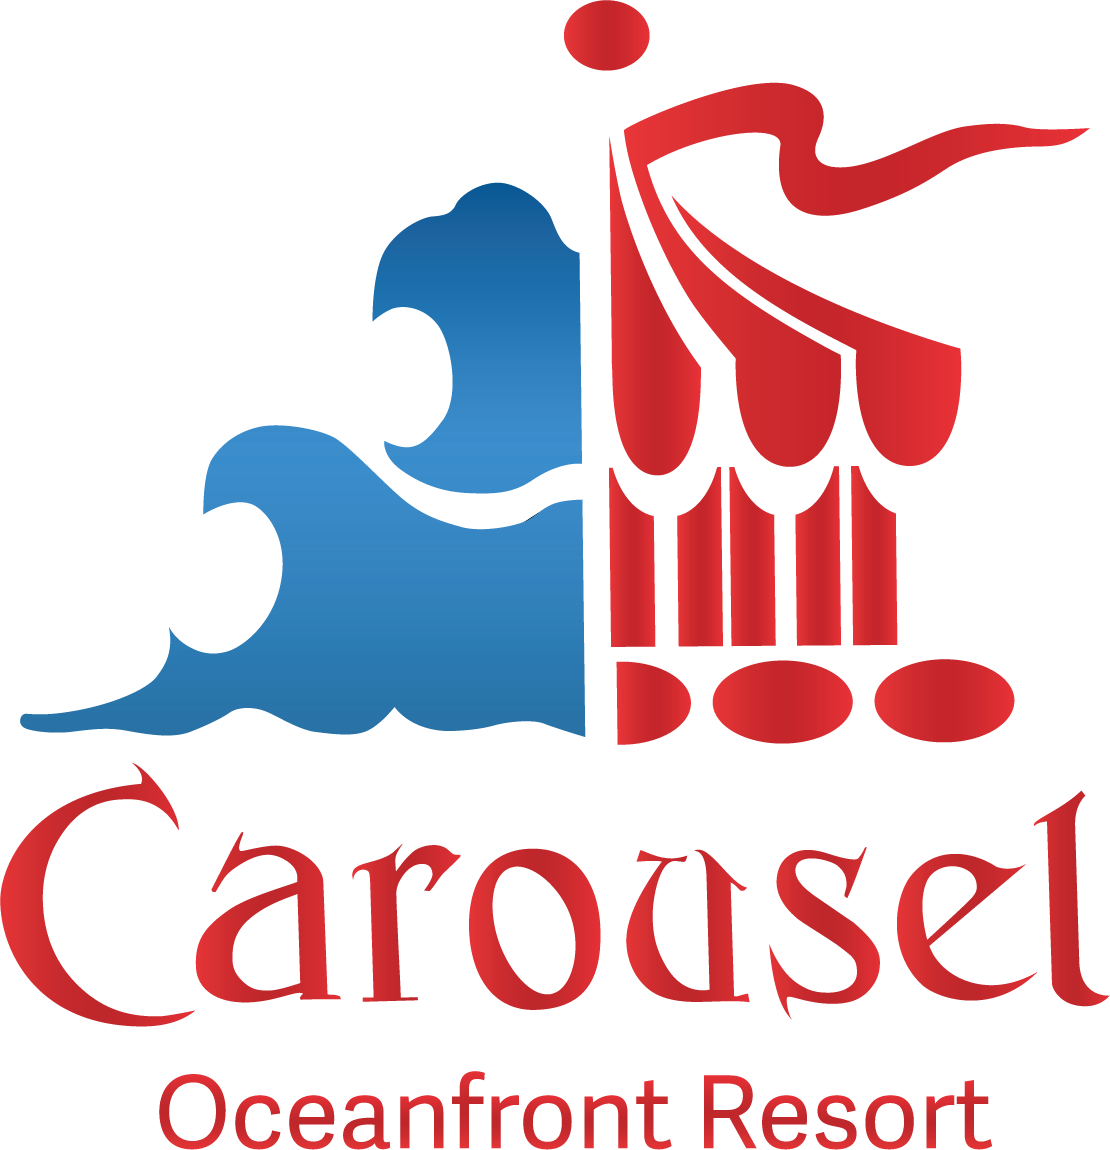 Explore Worcester County - Carousel Hotel